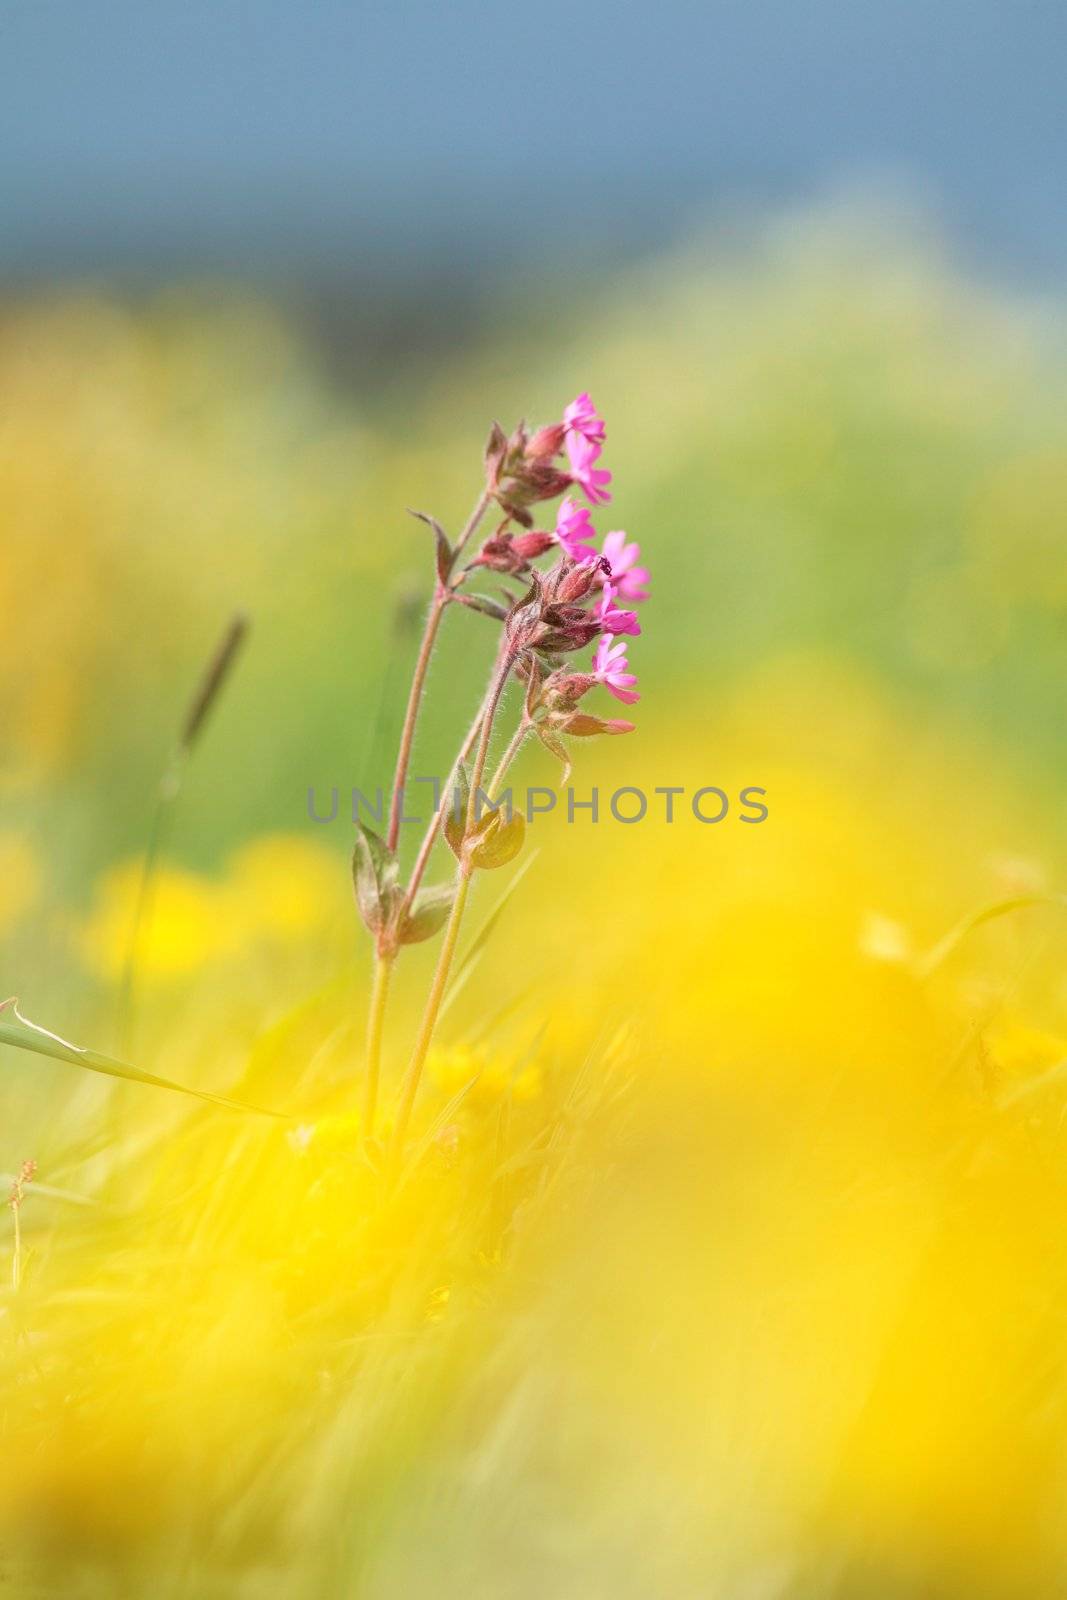 spring flowers in a field VERY SHALLOW DOF!...........